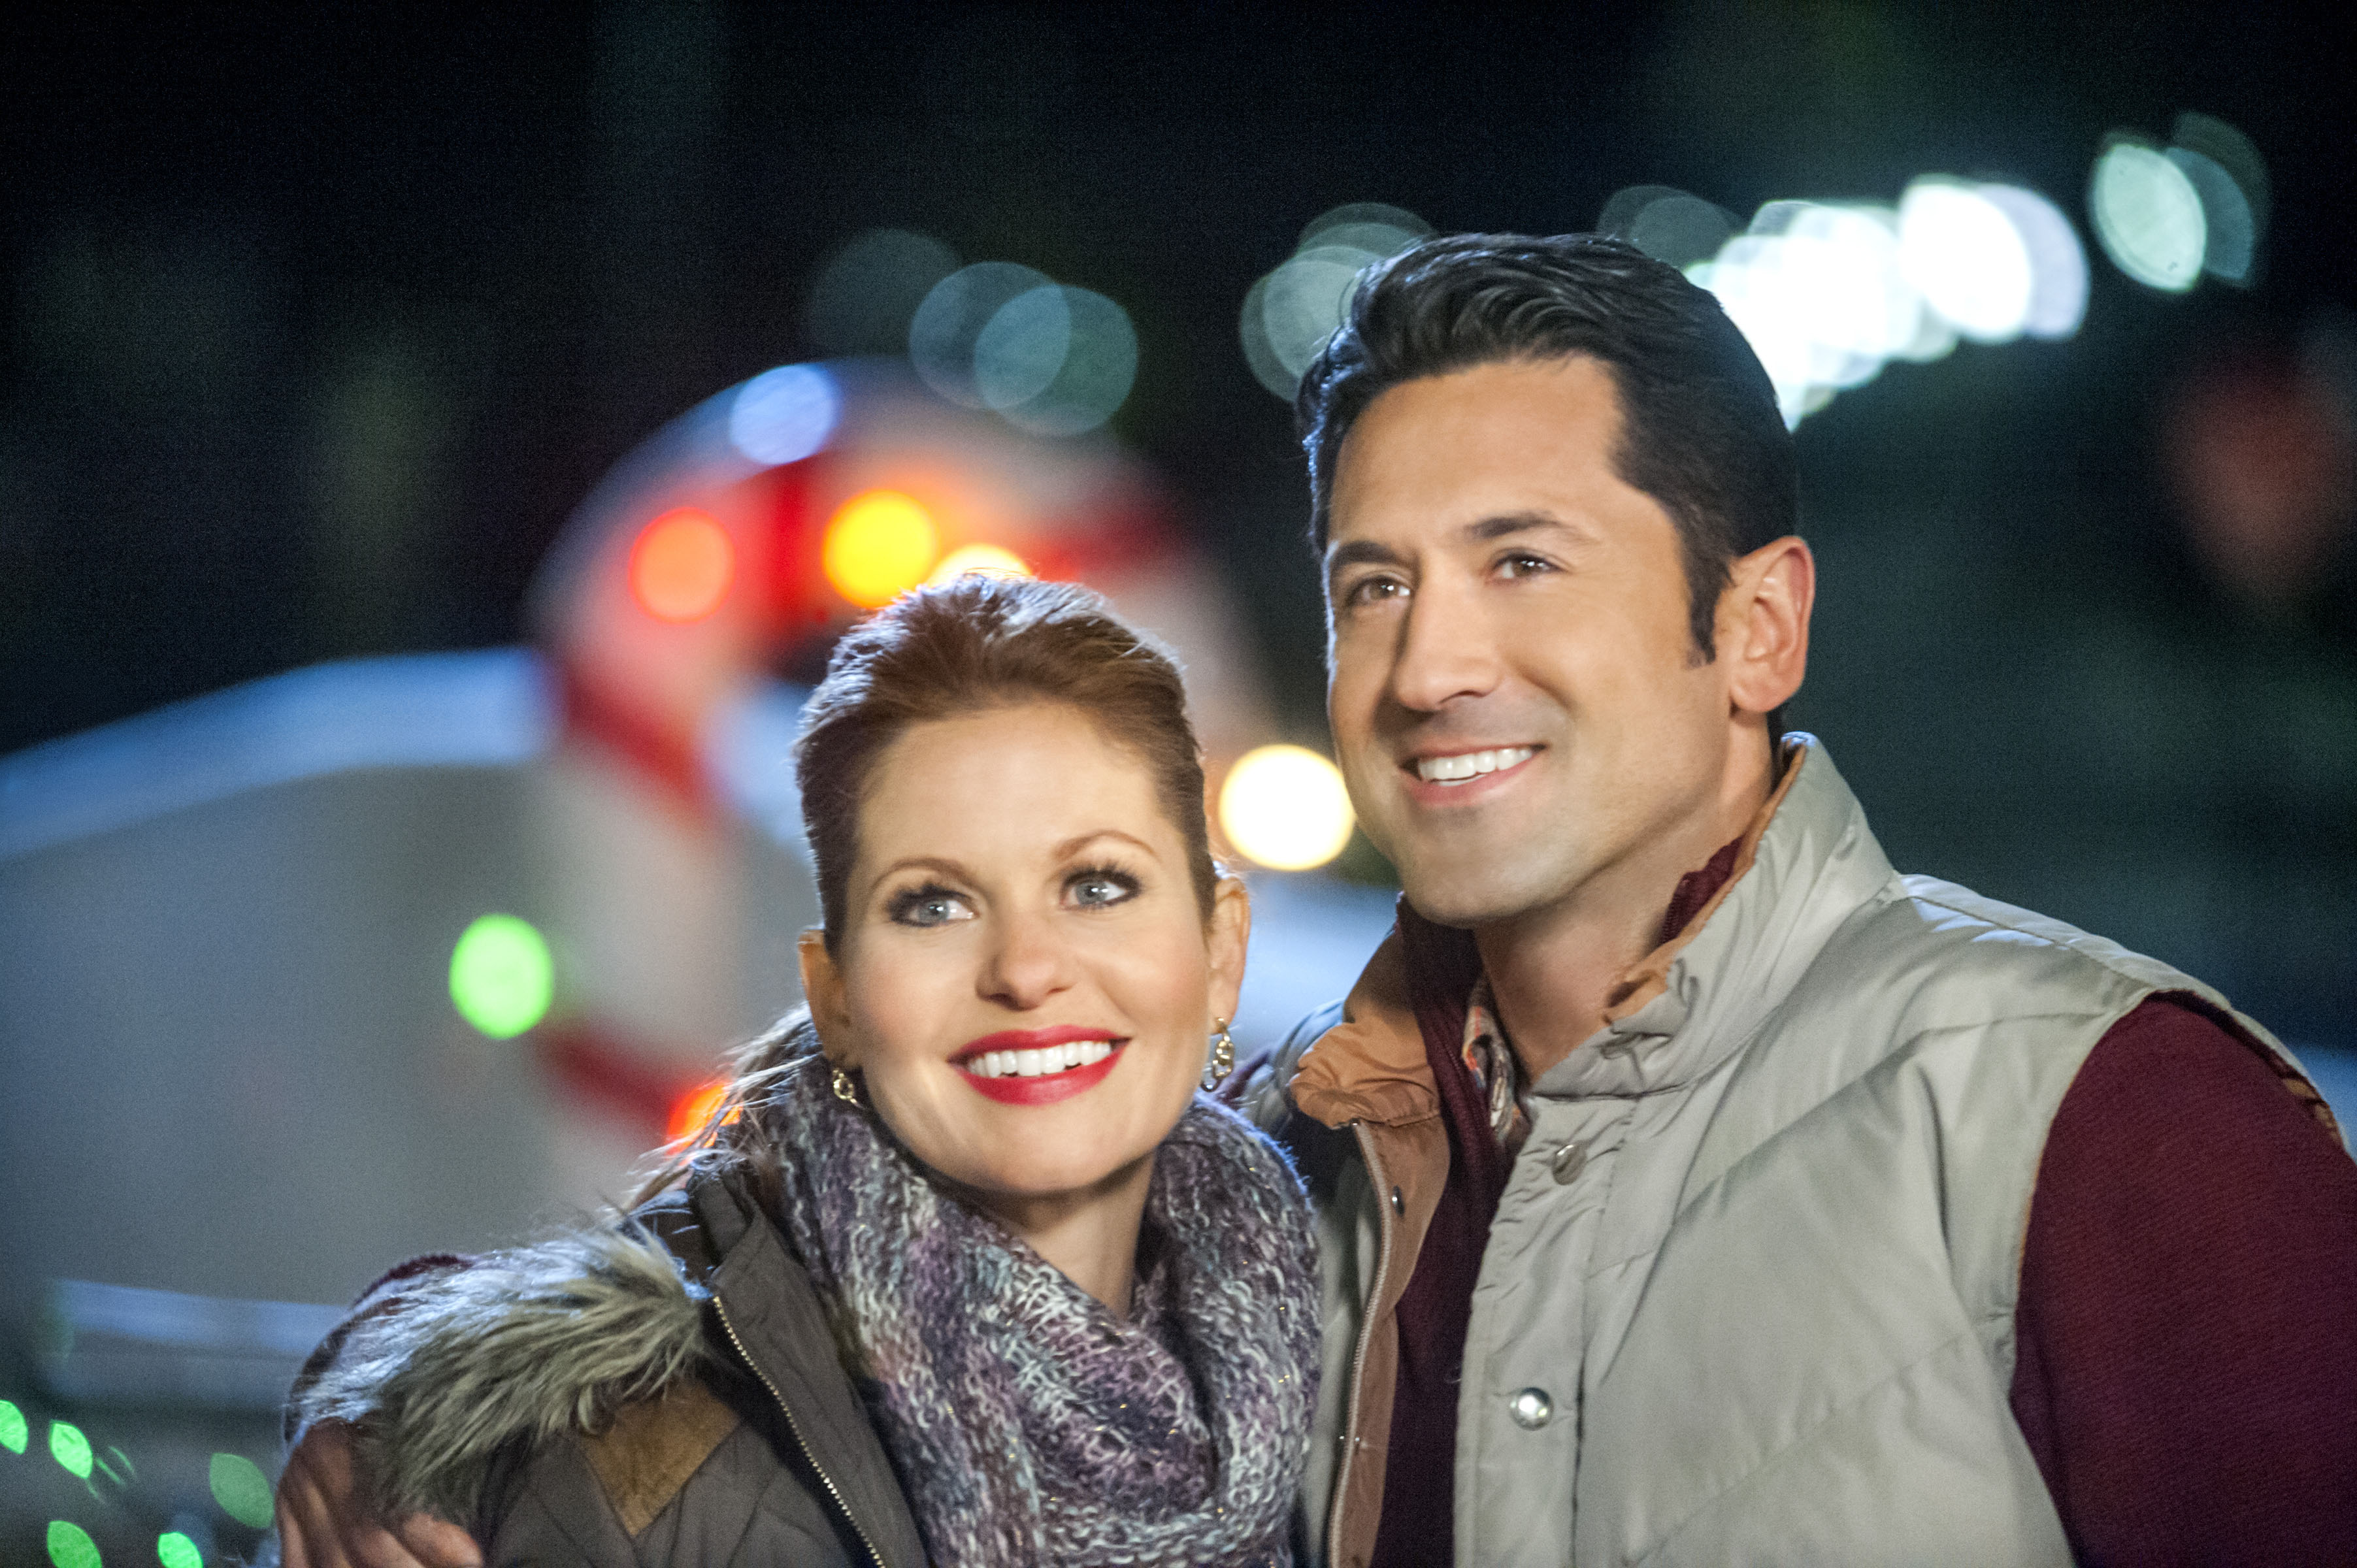 Smiling Candace Cameron Bure and David O'Donnell in 'Christmas Under Wraps'